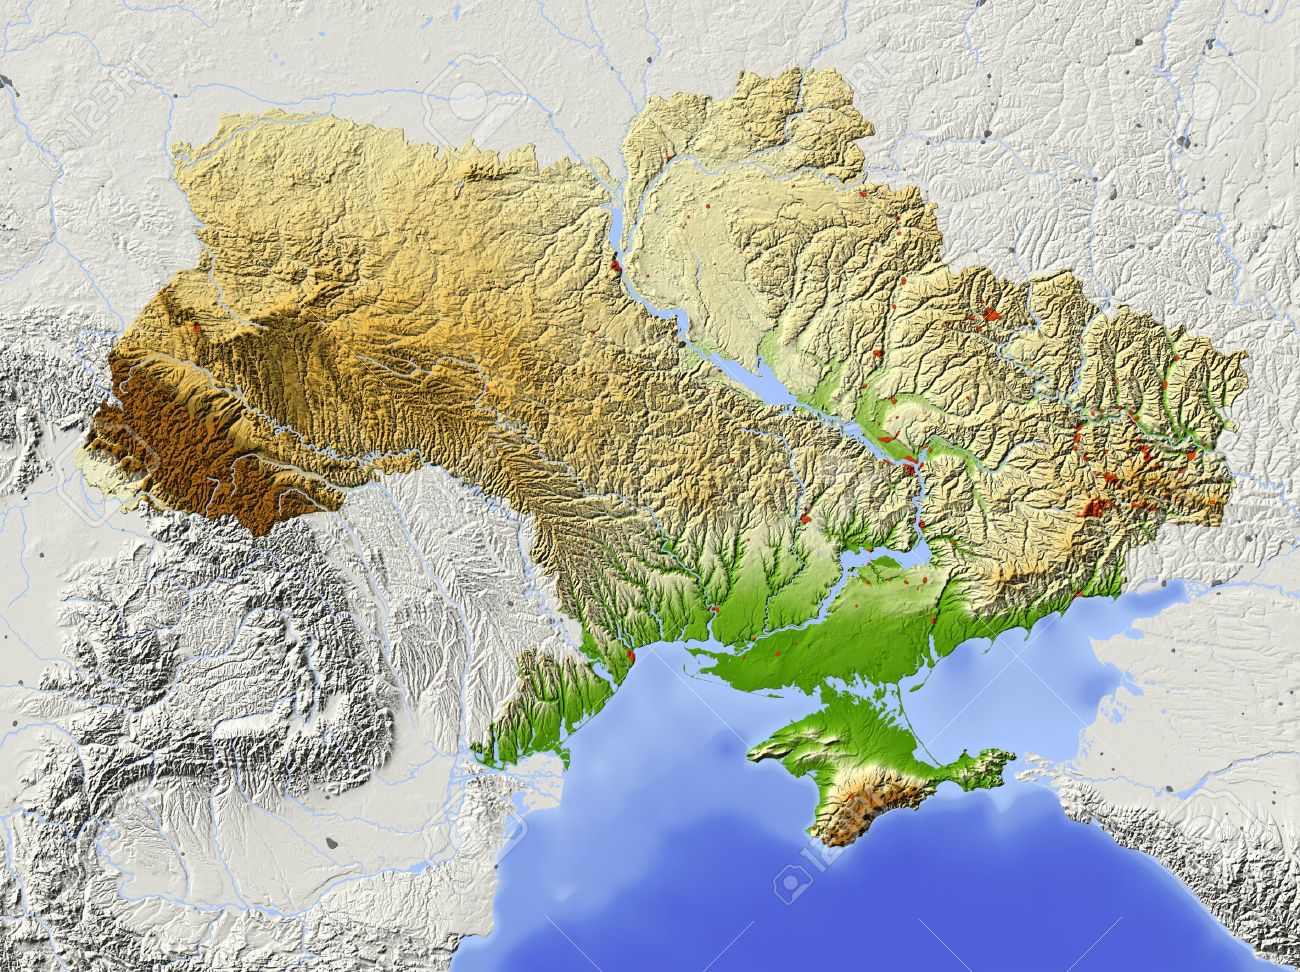 11687746-ukraine-shaded-relief-map-with-major-urban-areas-surrounding-territory-greyed-out-colored-according-.jpg